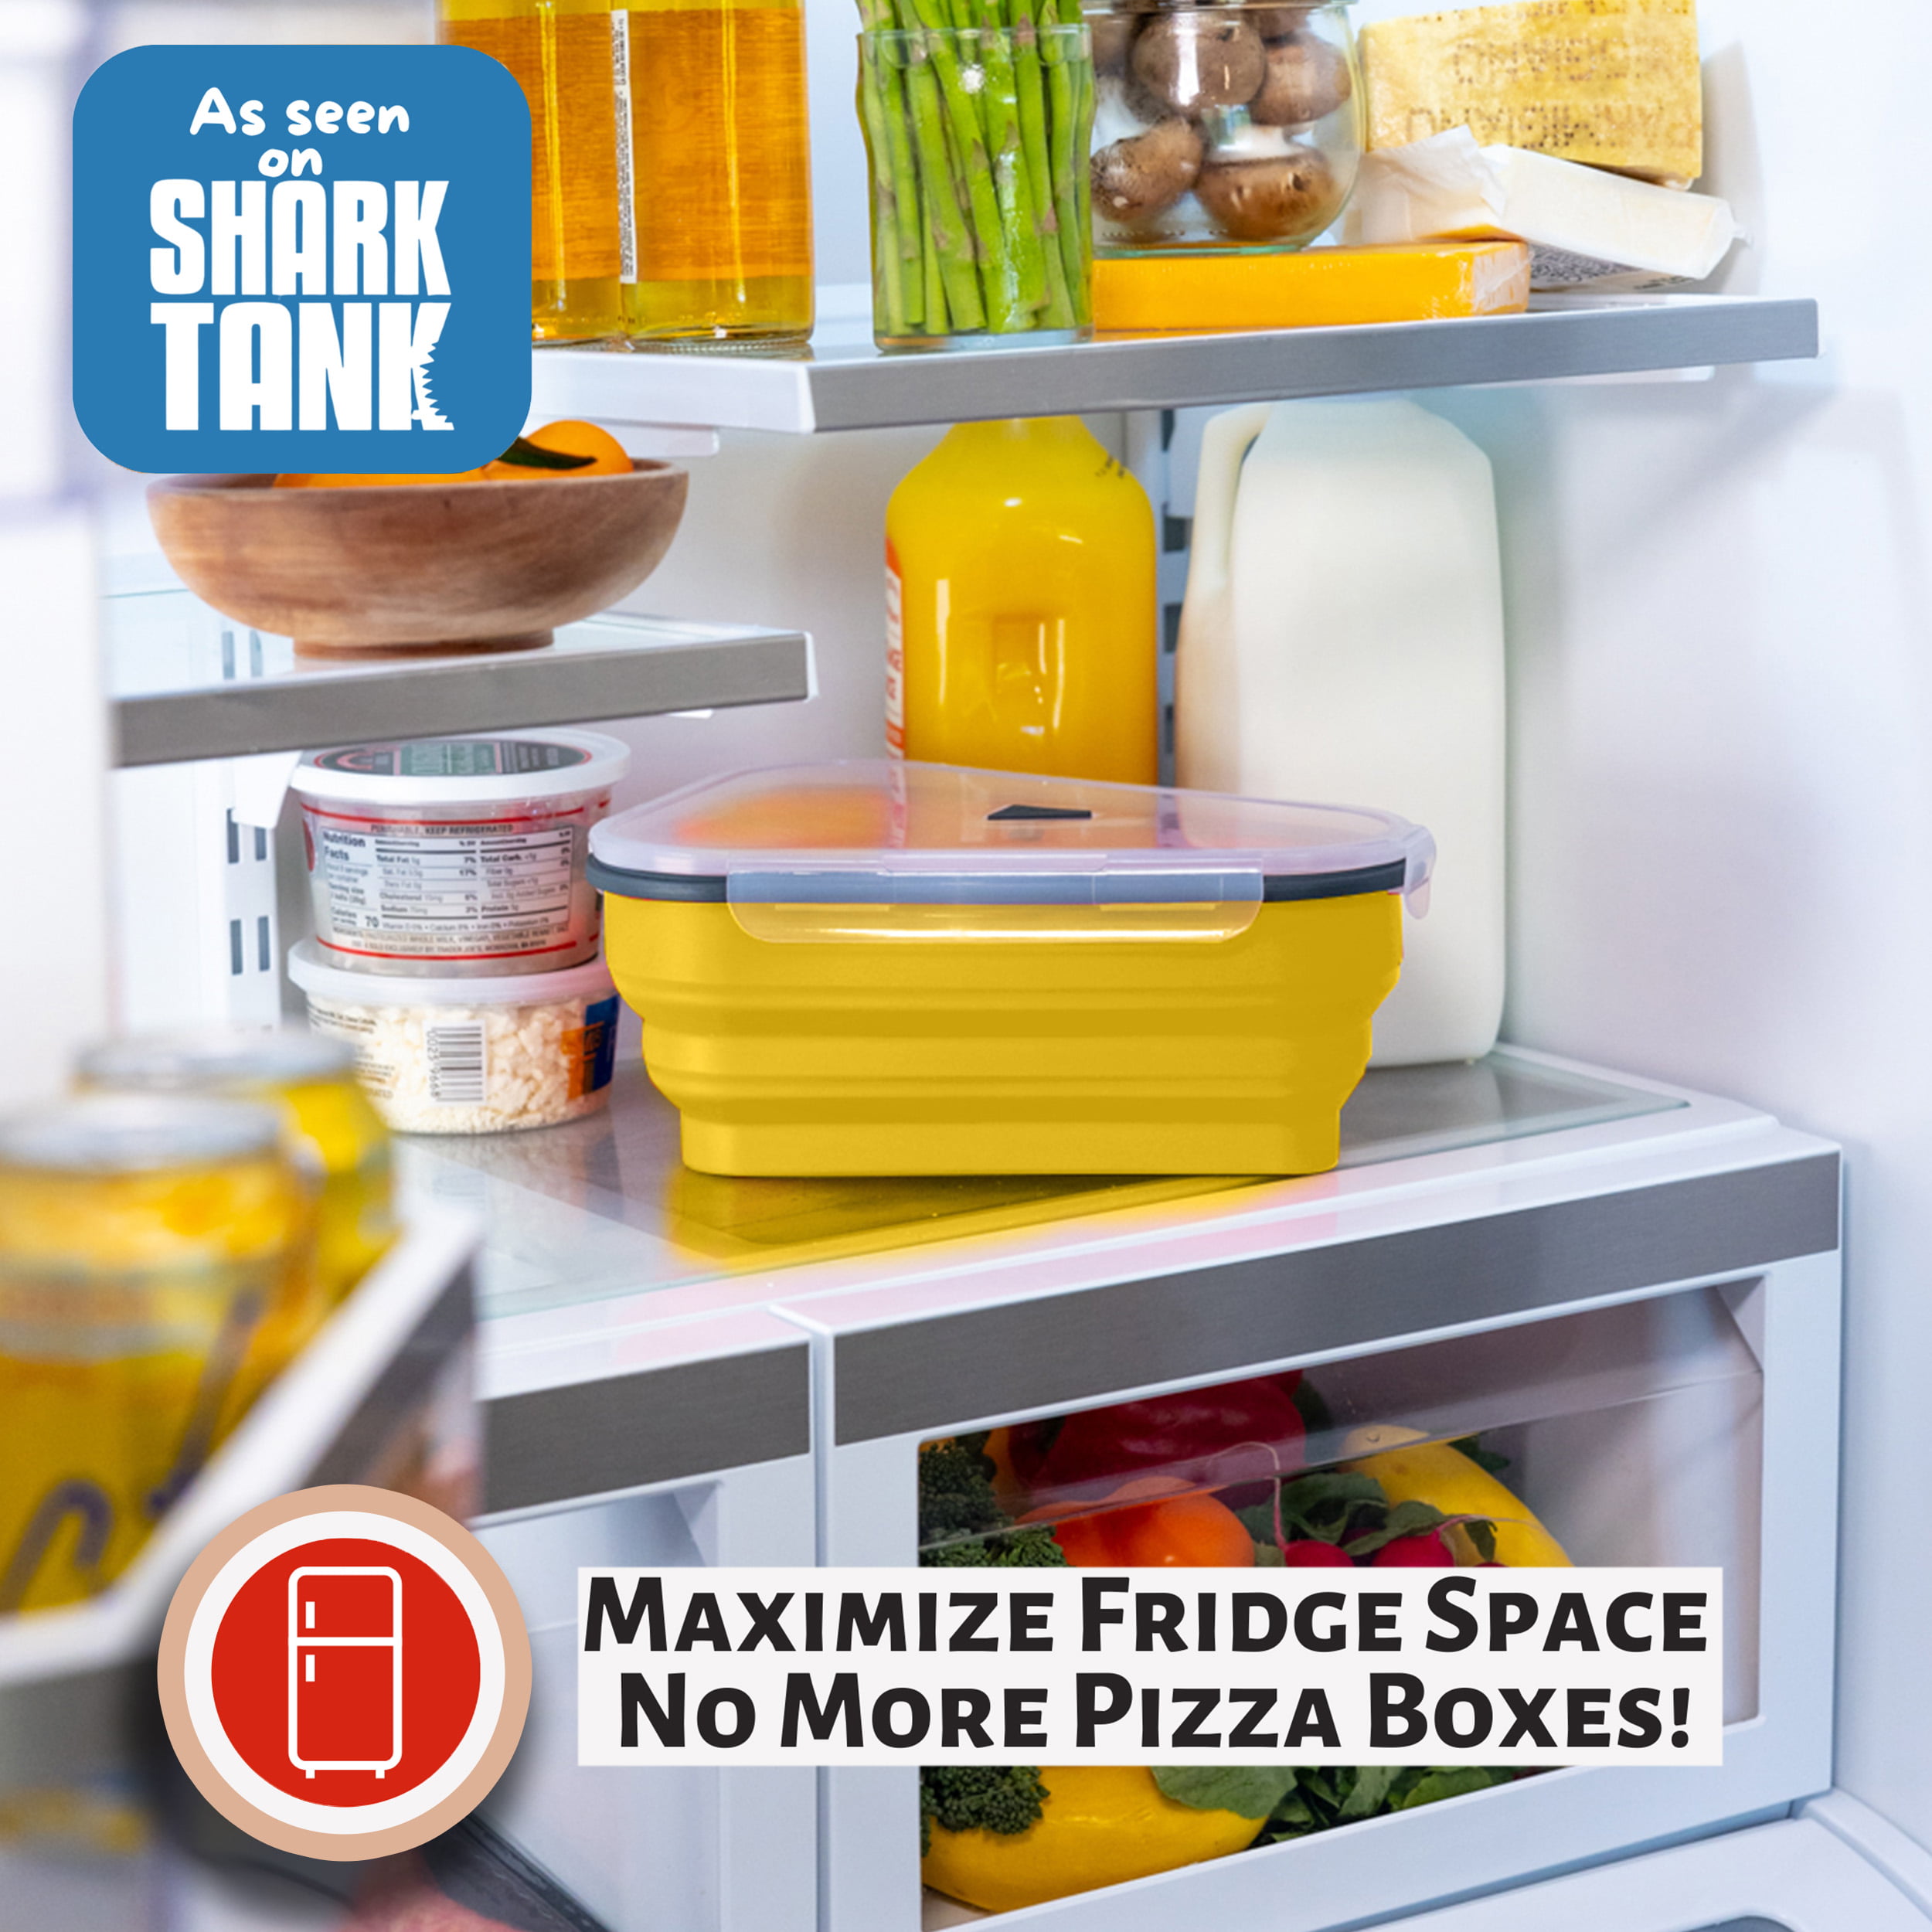 Pizza storage Container Expandable With 5 Microwavable Serving Trays BPA  Free